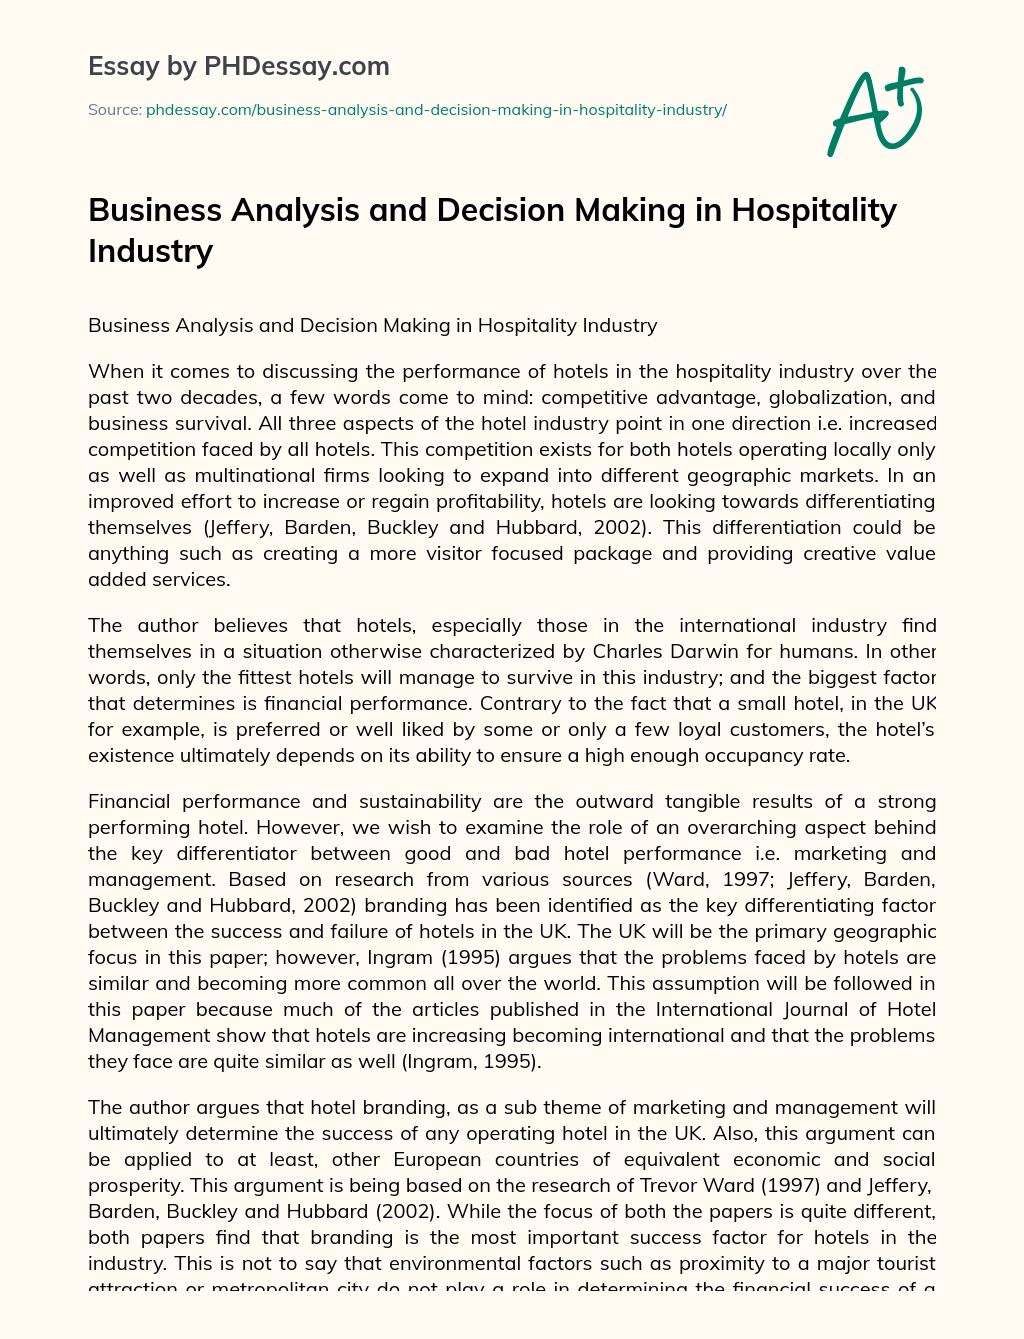 Business Analysis and Decision Making in Hospitality Industry essay